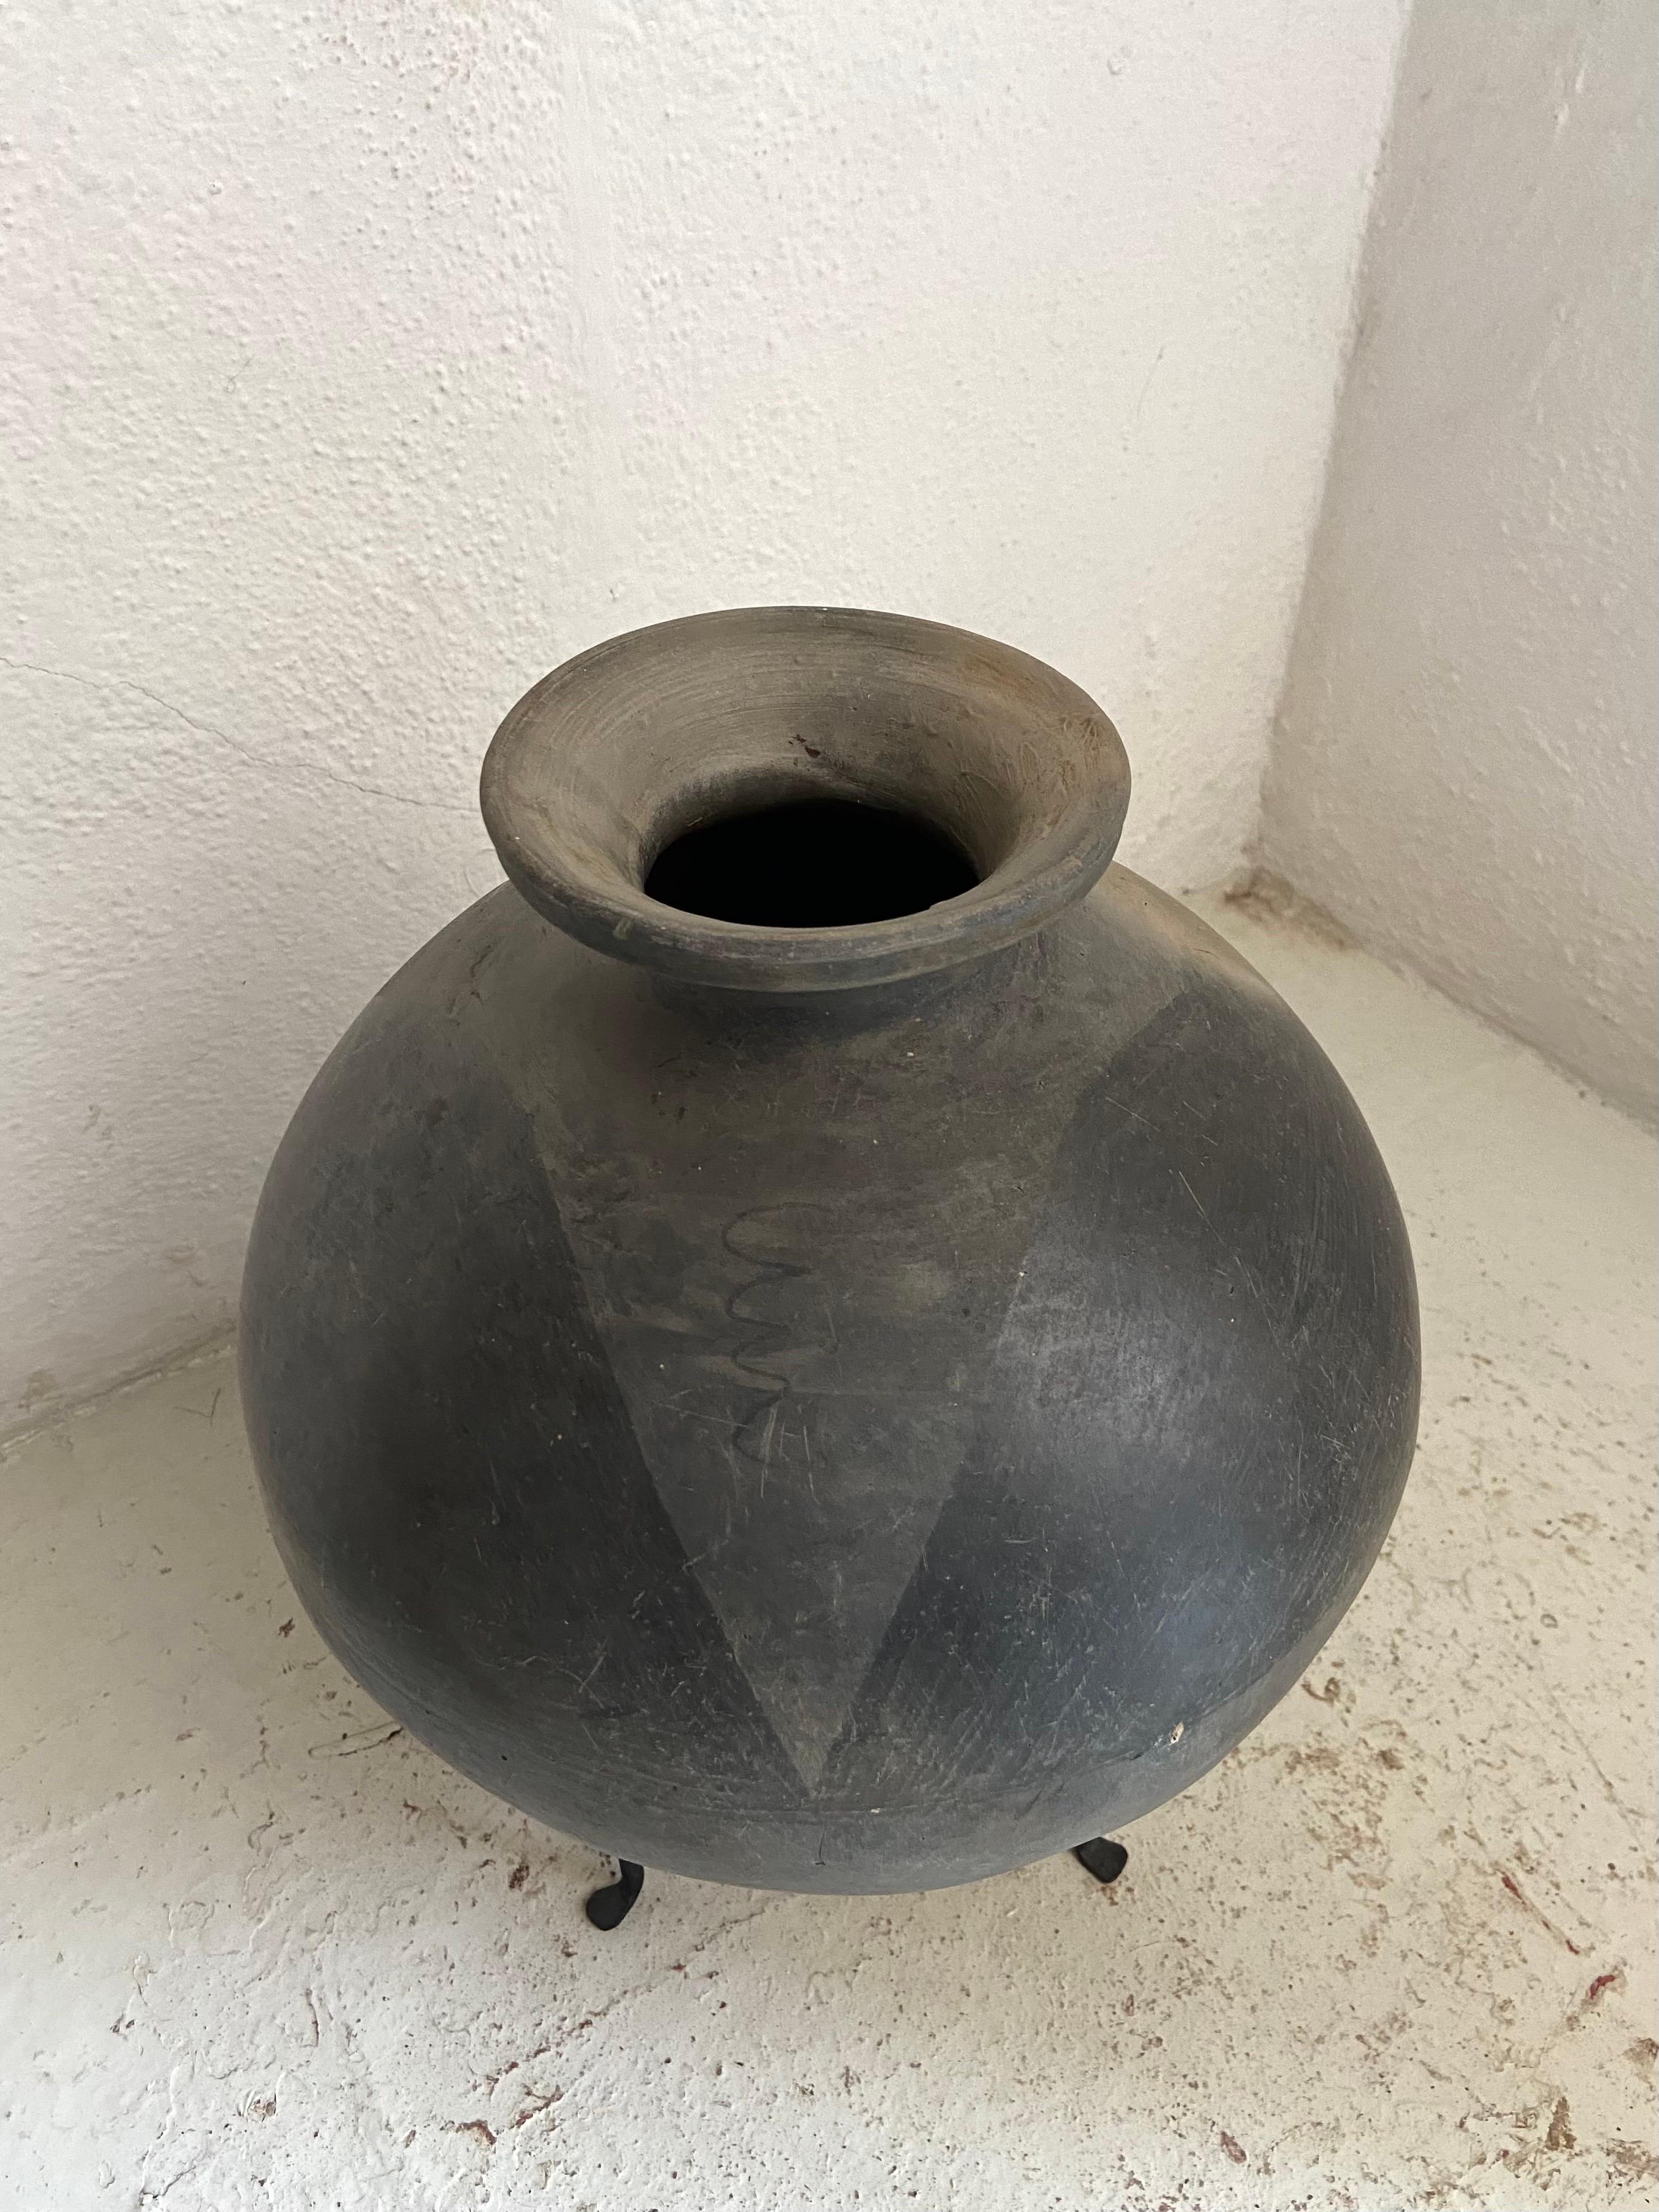 1950´s mezcal ceramic jar from San Bartolo Coyotepec, Oaxaca. Originally used for transporting mezcal by way of donkey, these ceramic jars typically have peak like designs drawn on them. The type of black clay that is used is only accessible in that